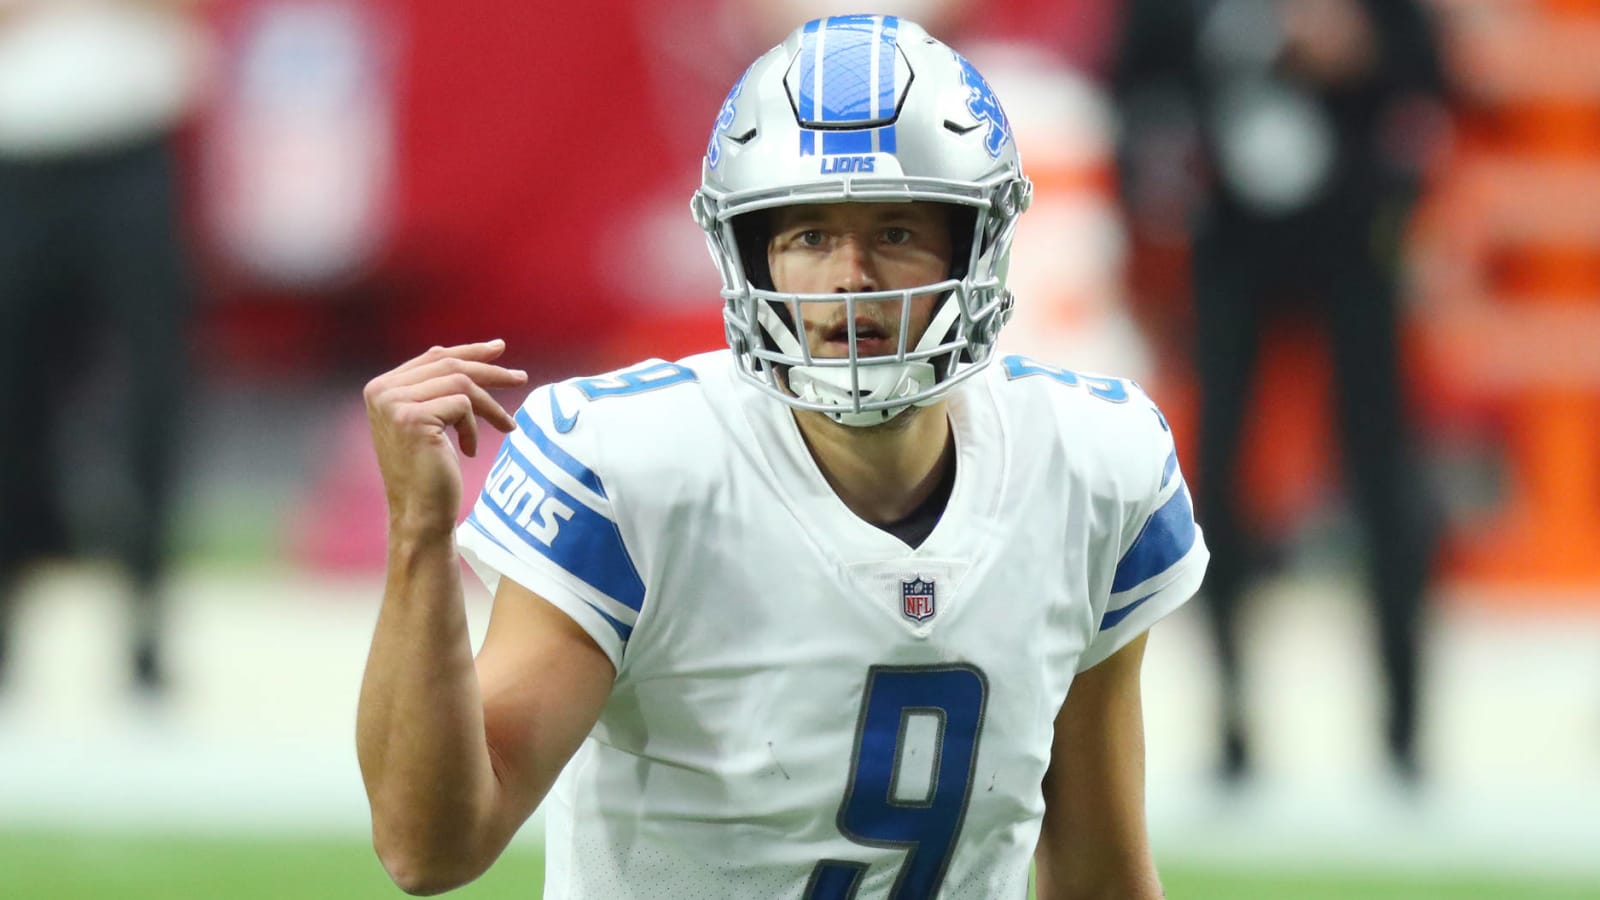 Kelly Stafford reacts to Matthew going on COVID list